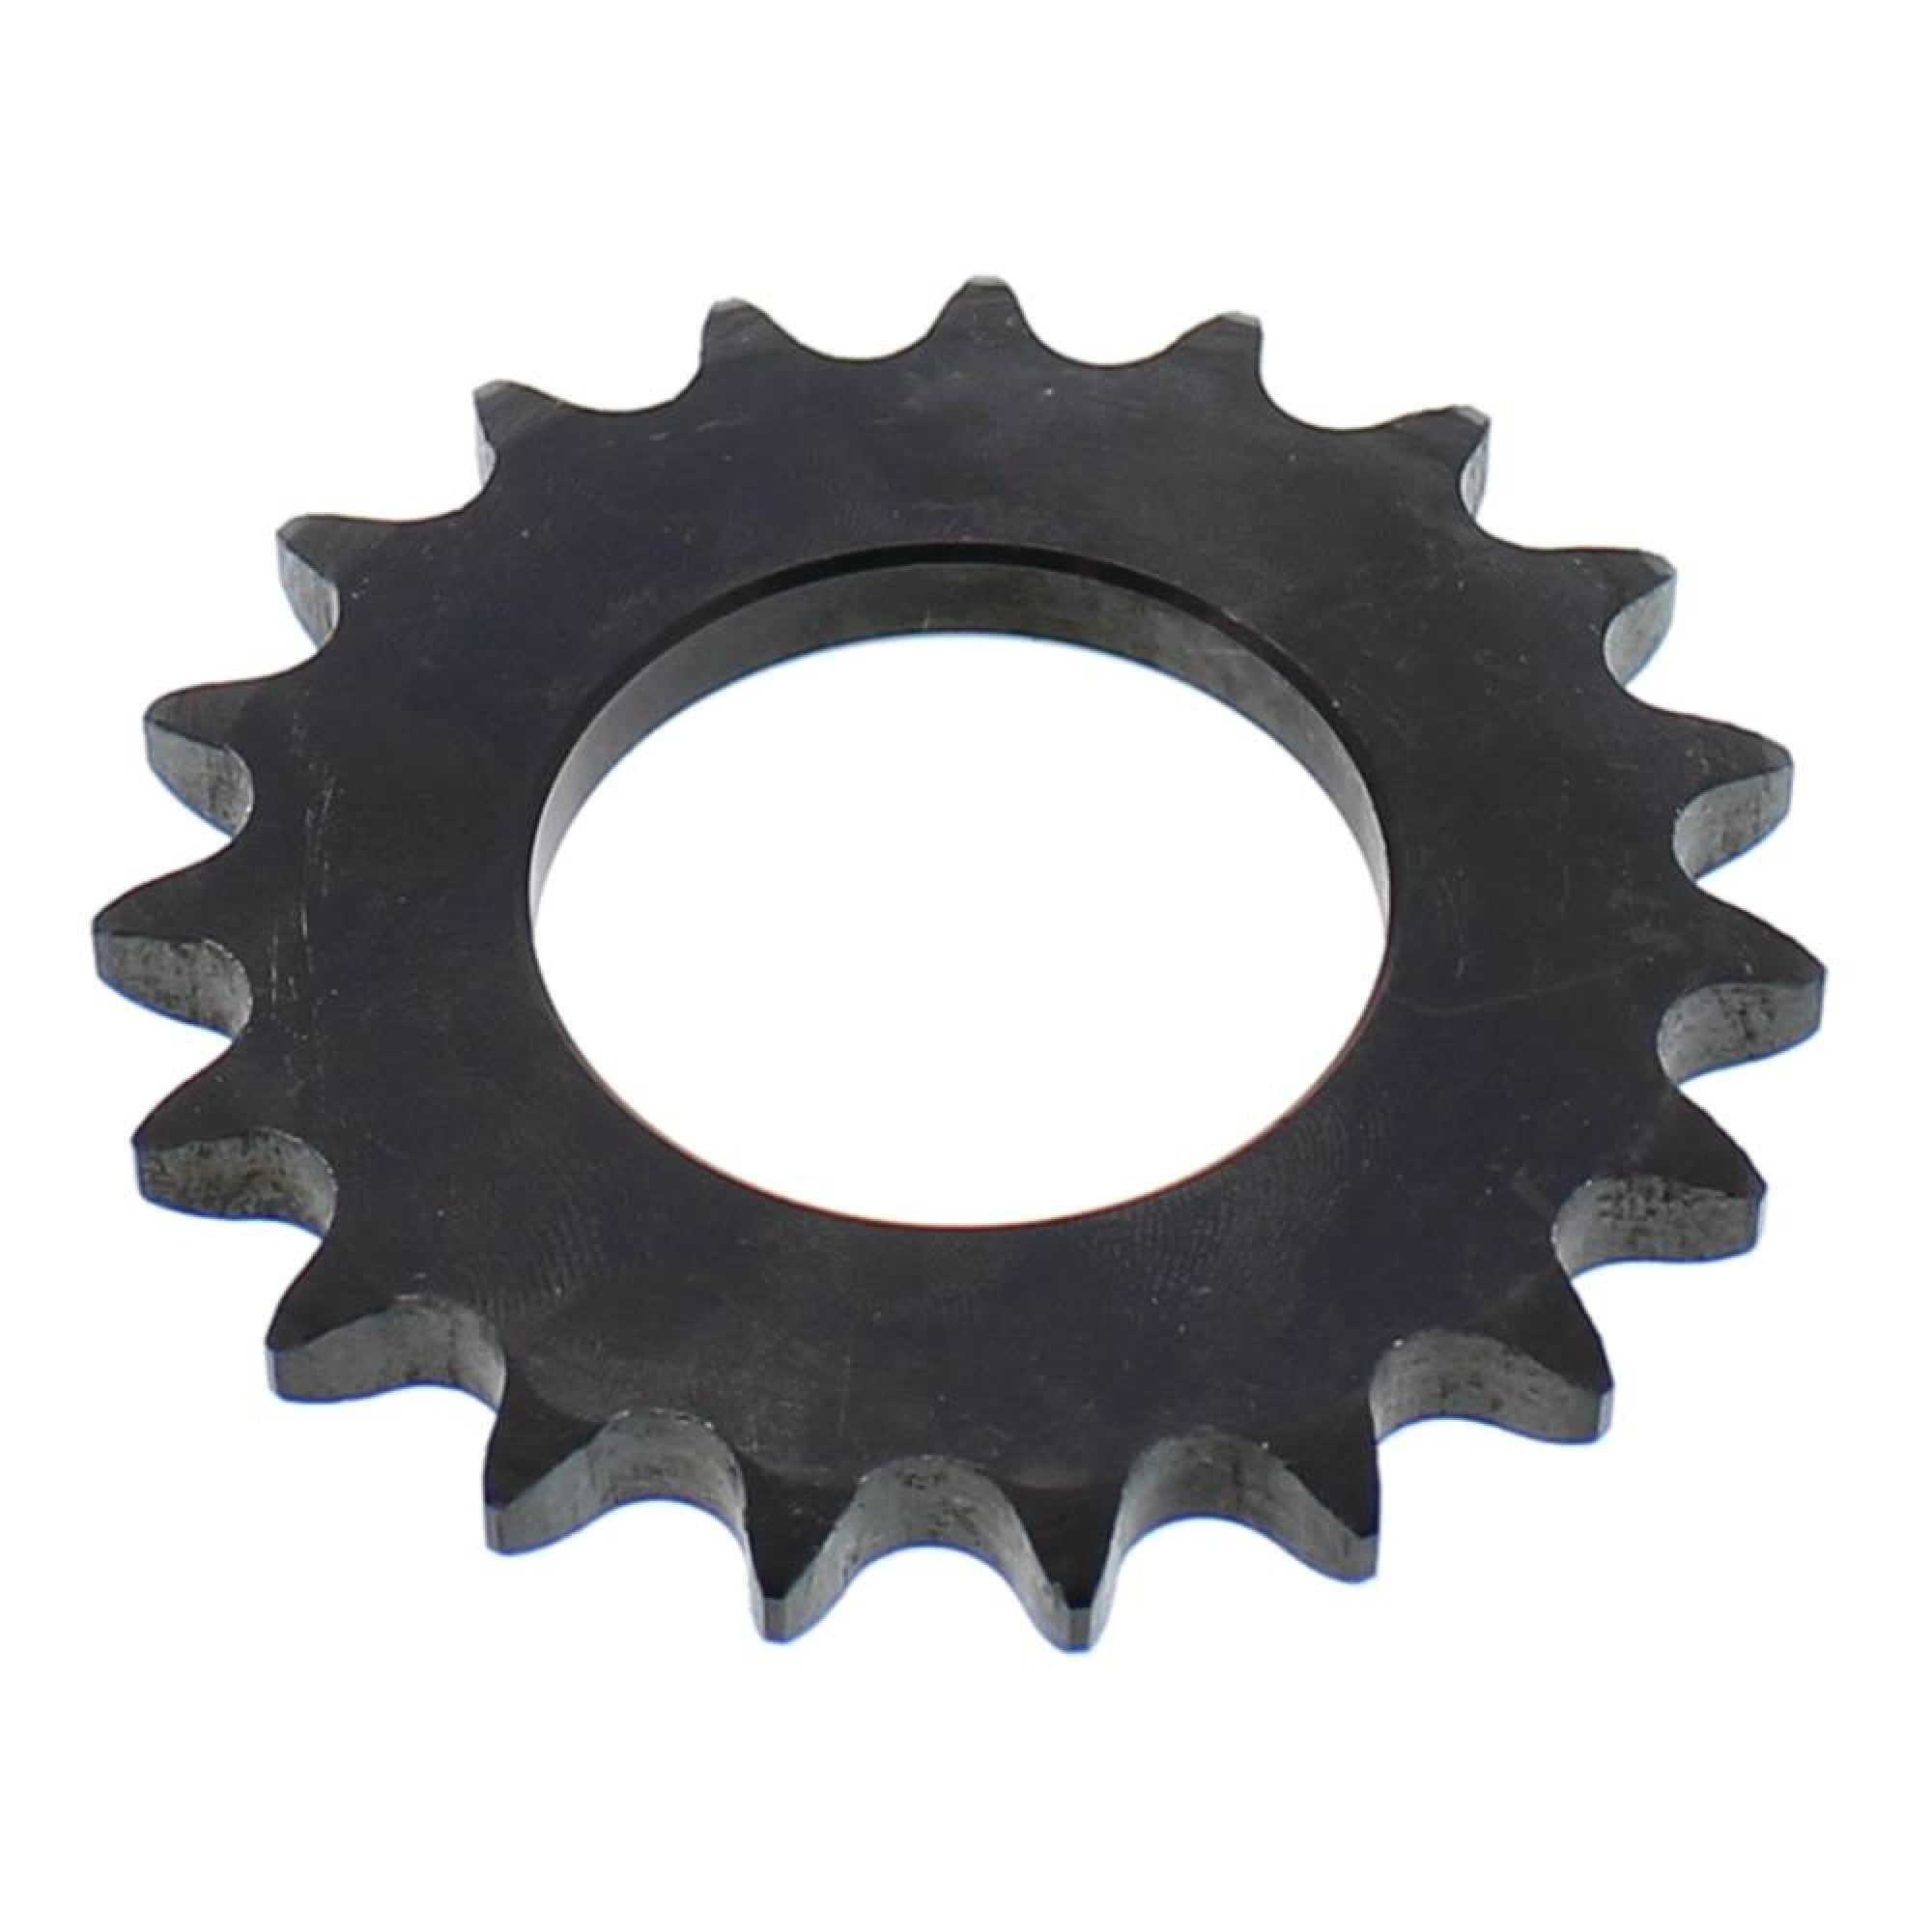 New Complete Tractor Idler Sprocket for Universal Products 3016-0290